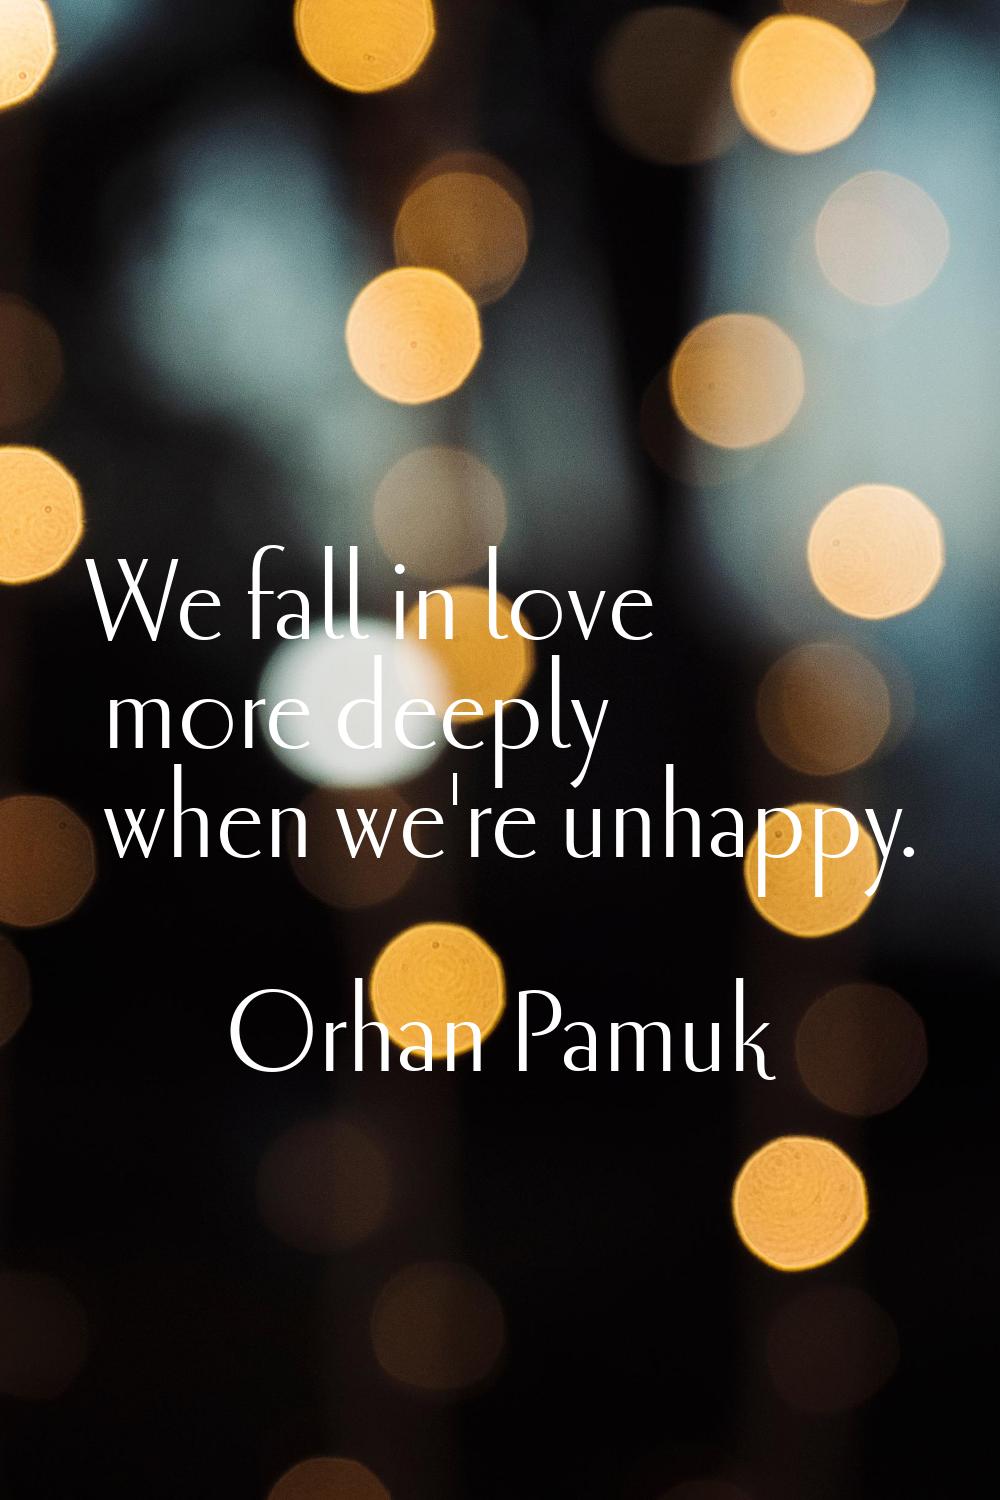 We fall in love more deeply when we're unhappy.